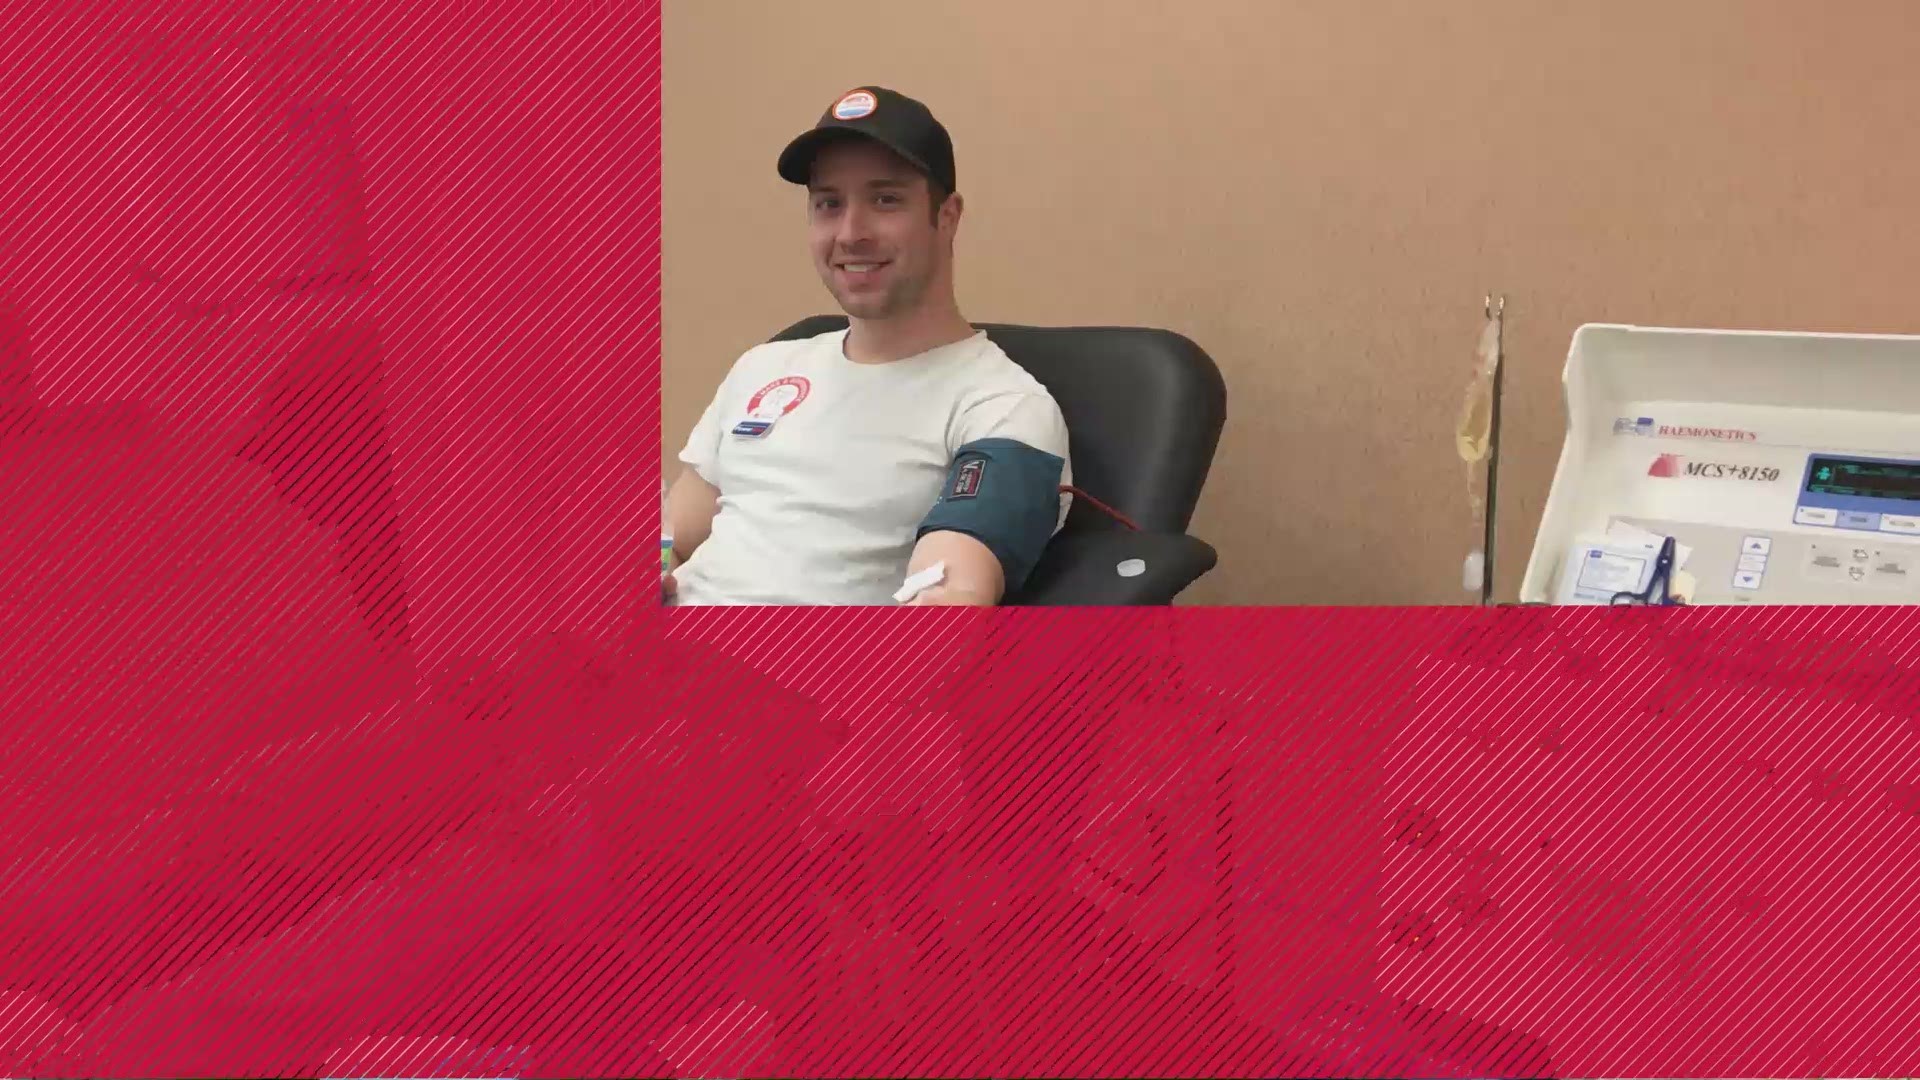 With all of Maine's blood donations yesterday during the 2020 NCM Red Cross Blood Drive, 459 lives will be saved.